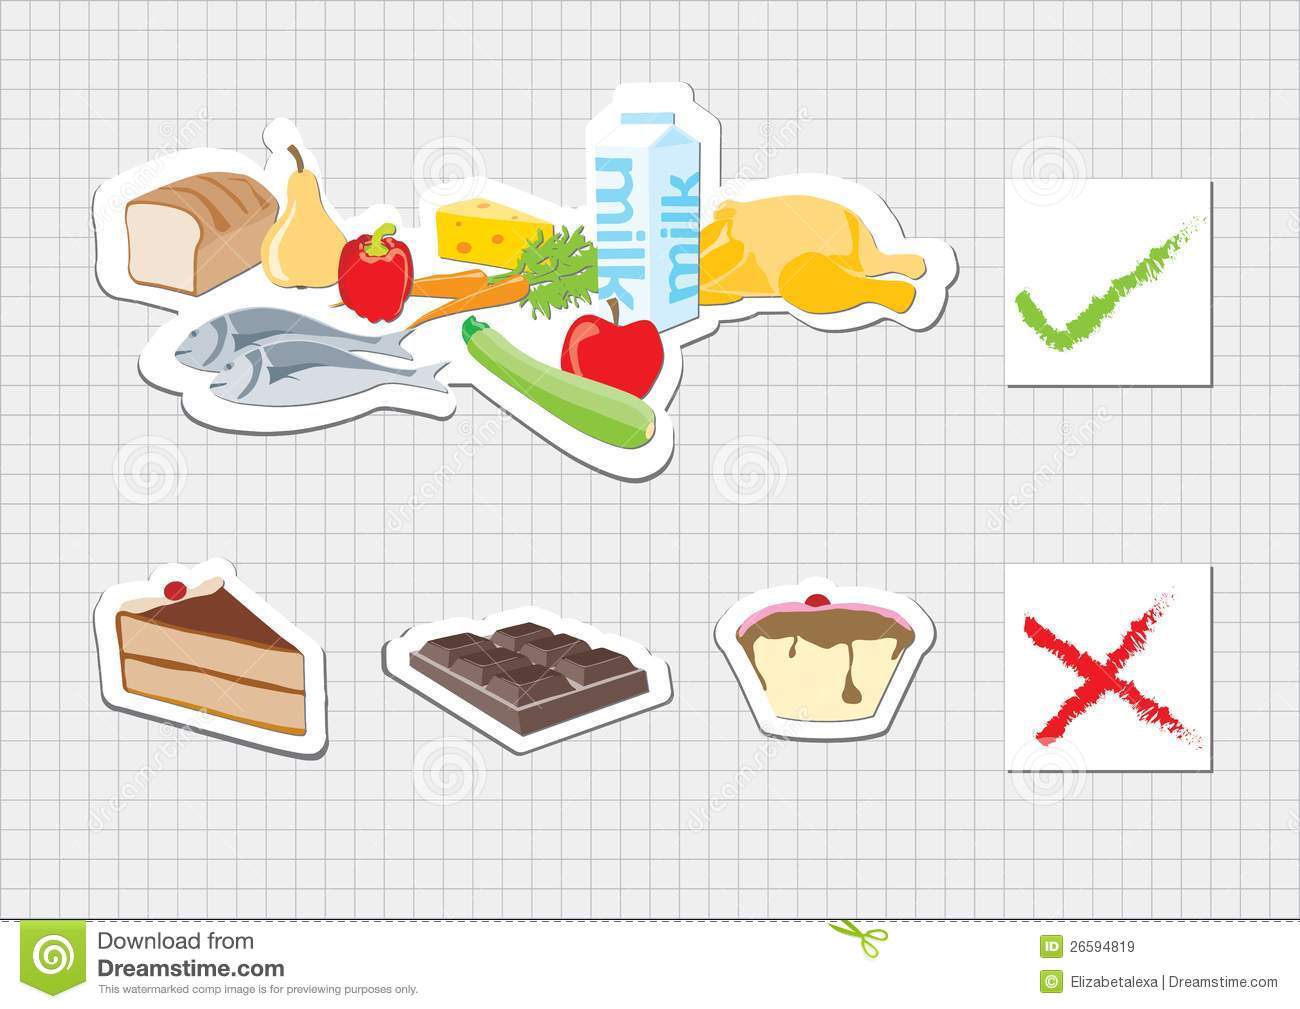 Food Groups Good And No Good Royalty Free Stock Images   Image    